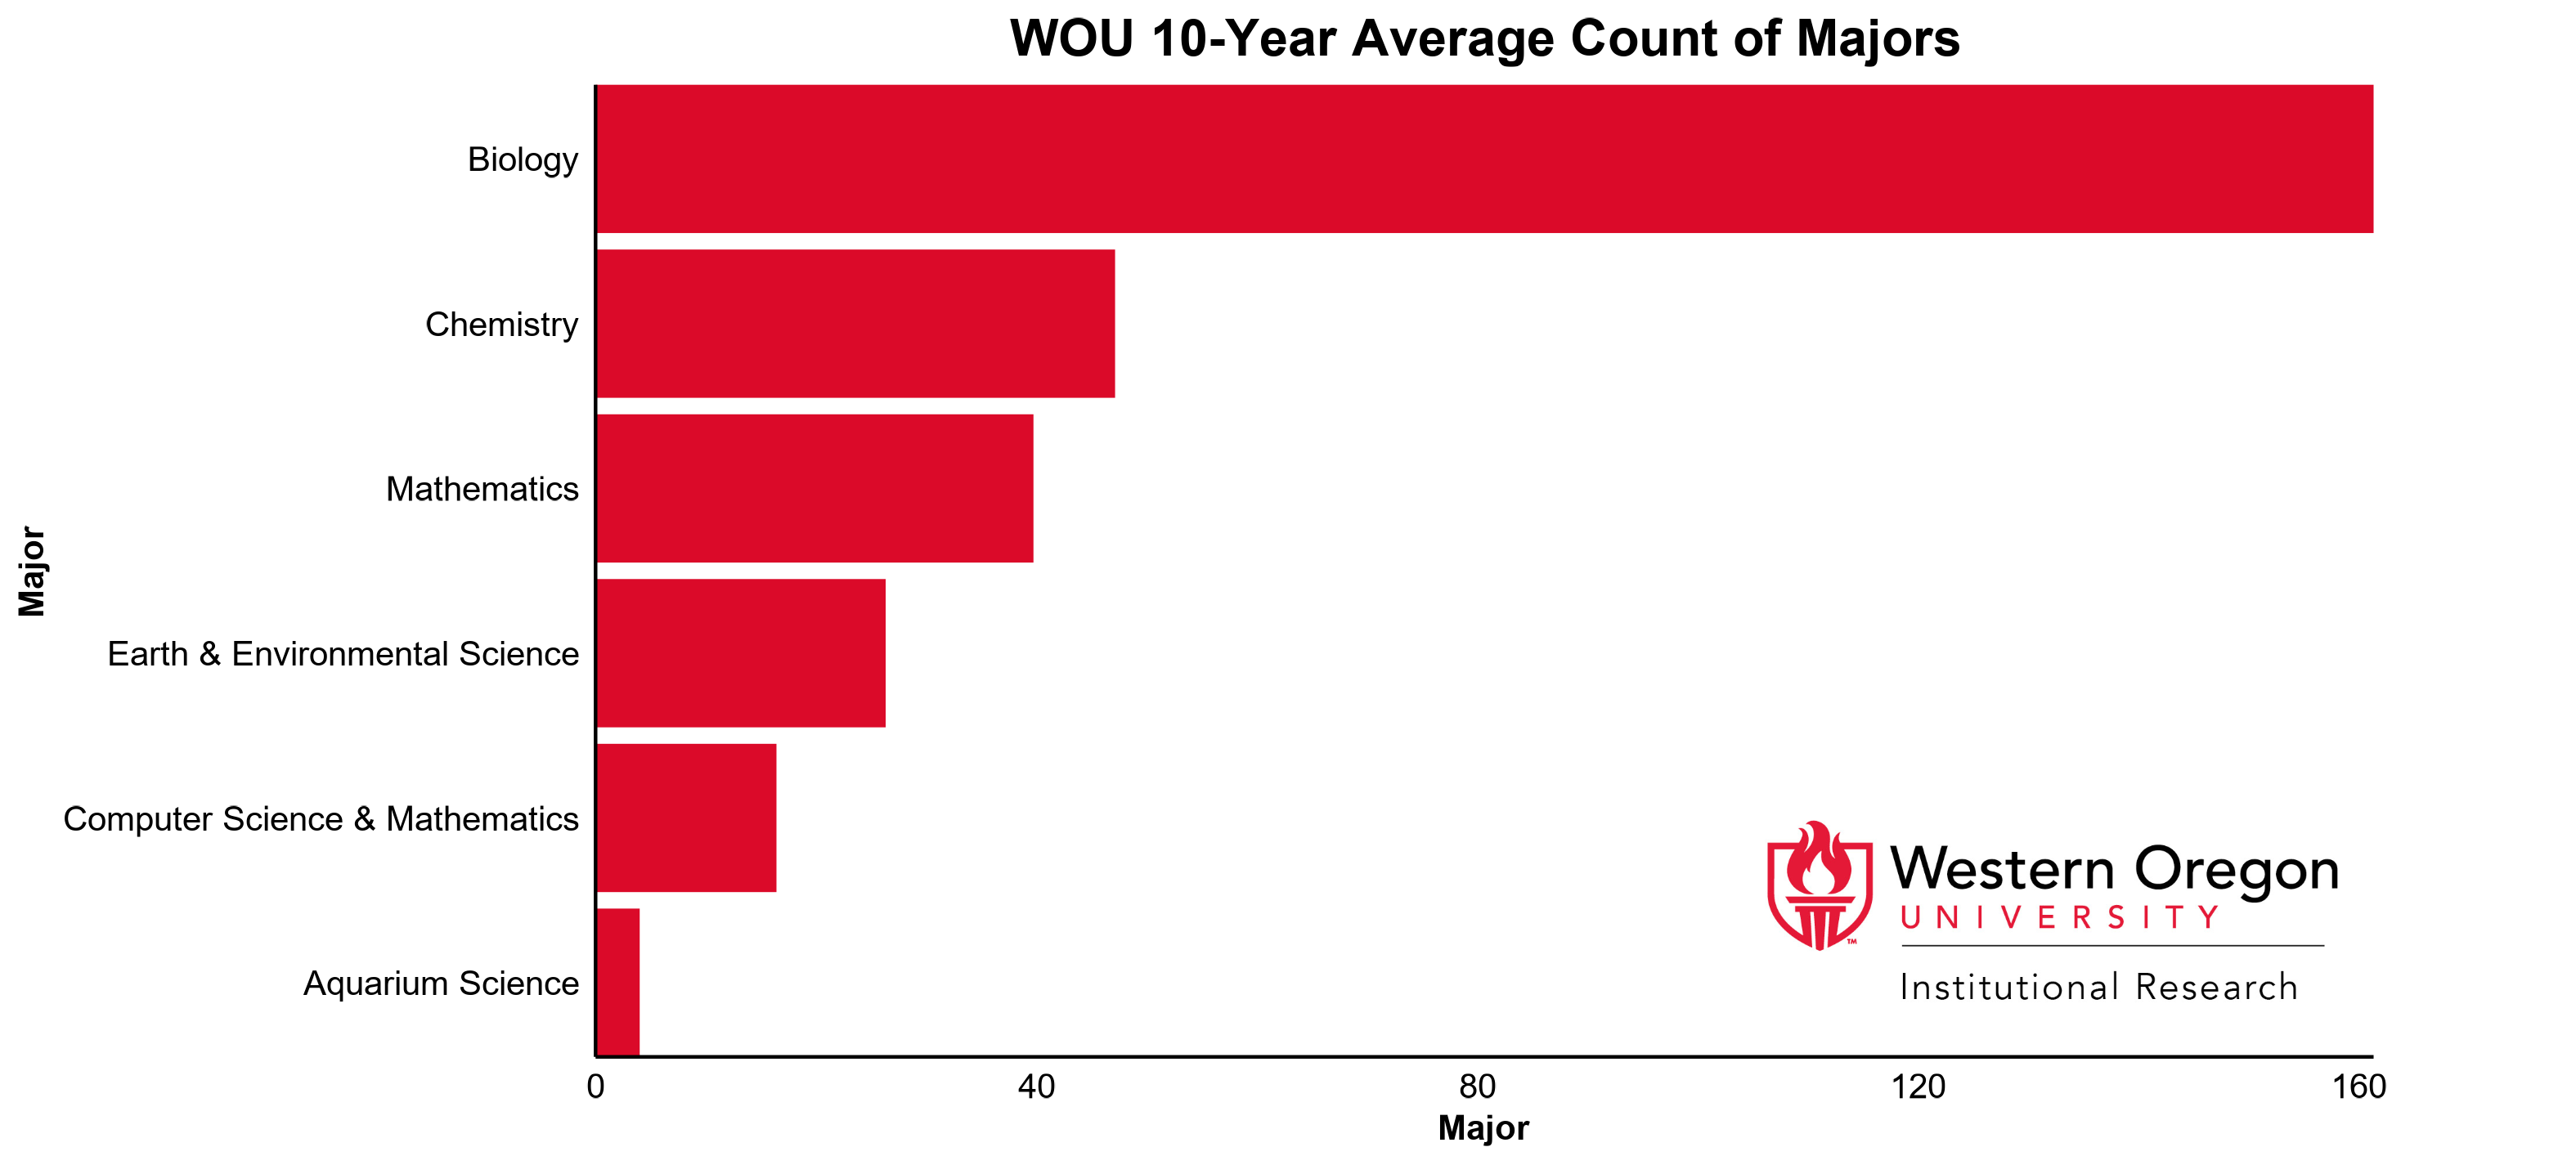 Bar graph of the 10-year average count of majors at WOU for the Natural Sciences and Mathematics division